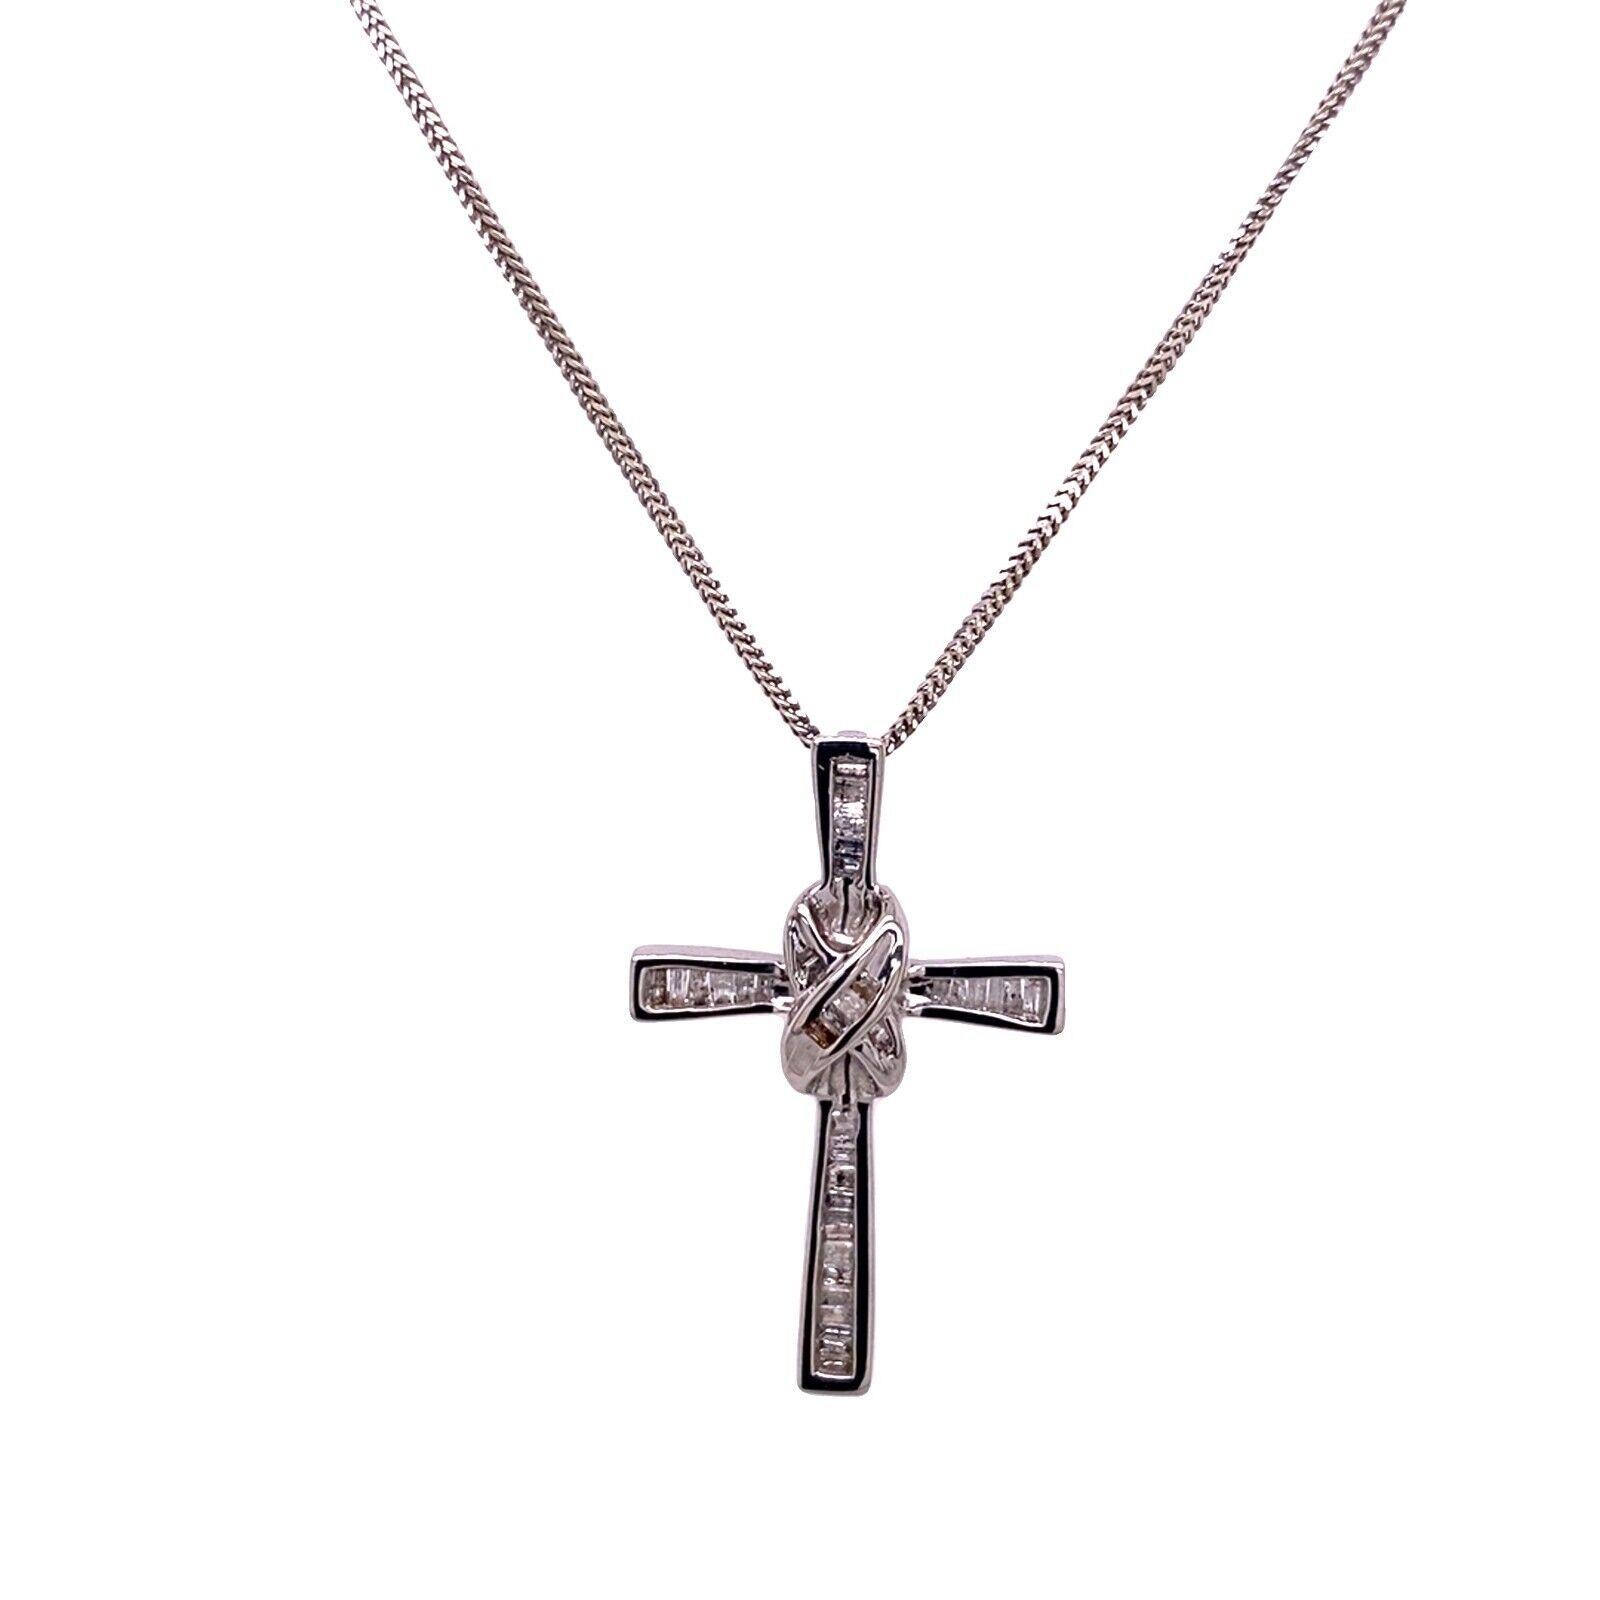 This delicate 14ct white gold diamond cross,features a 0.50ct G-H/I baguette diamonds, suspended on 18ct white gold foxtail chain, 16